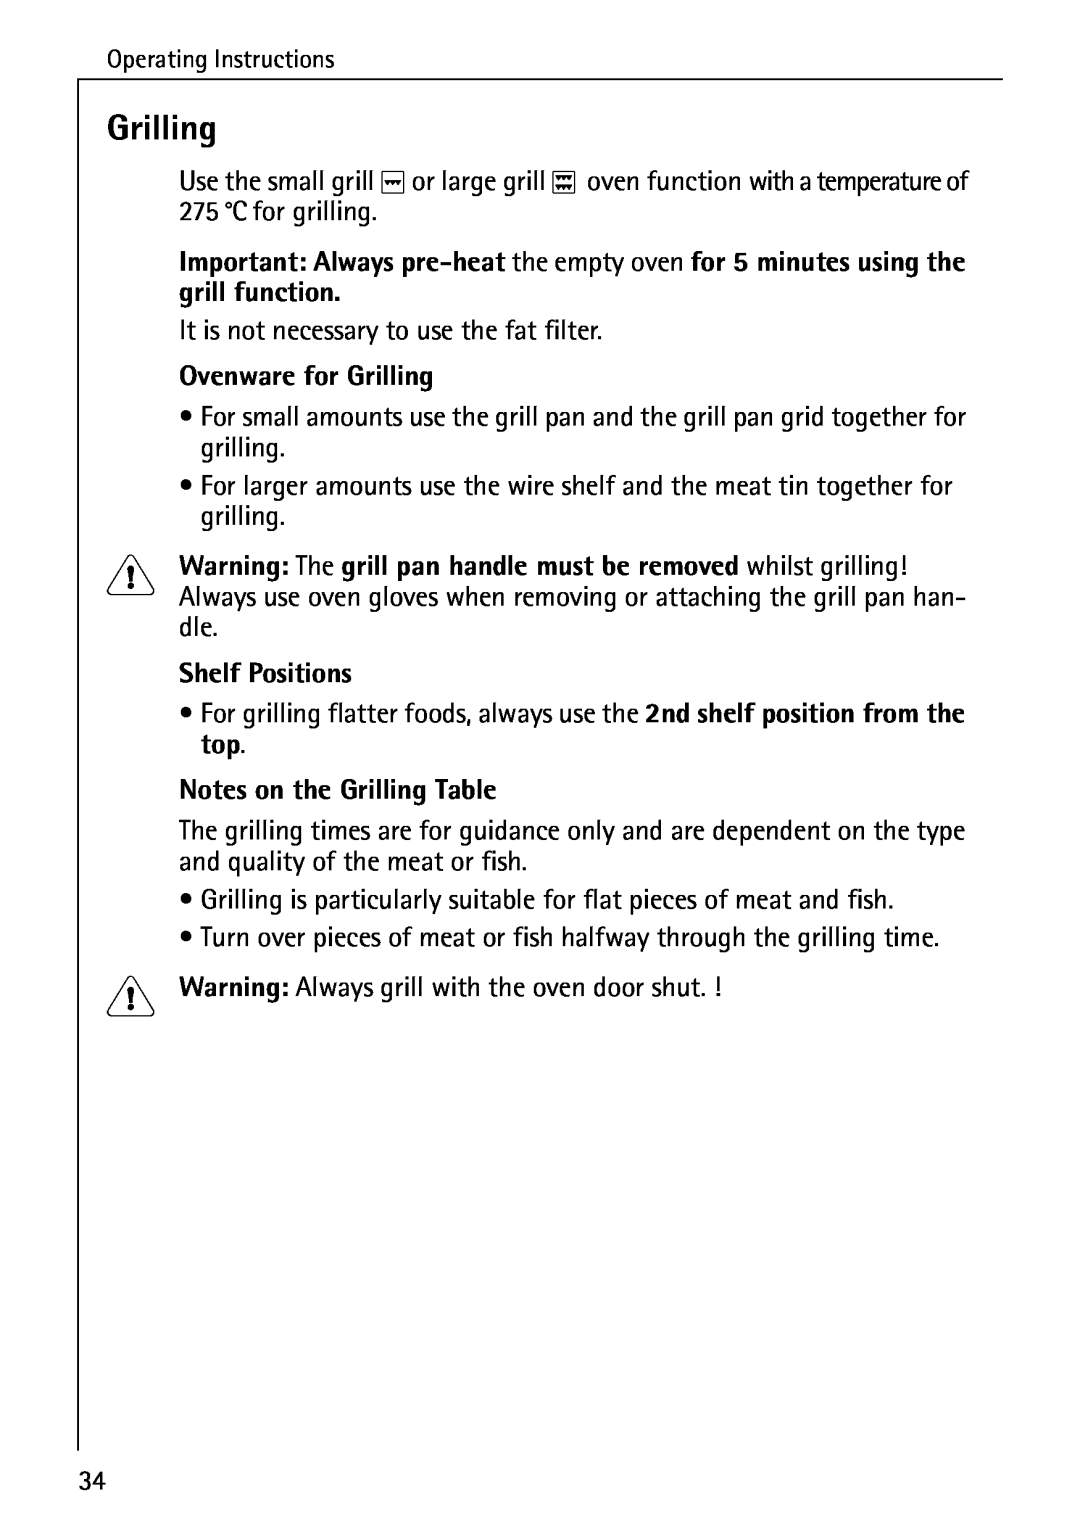 AEG B 4100 operating instructions Ovenware for Grilling, Notes on the Grilling Table, Shelf Positions 